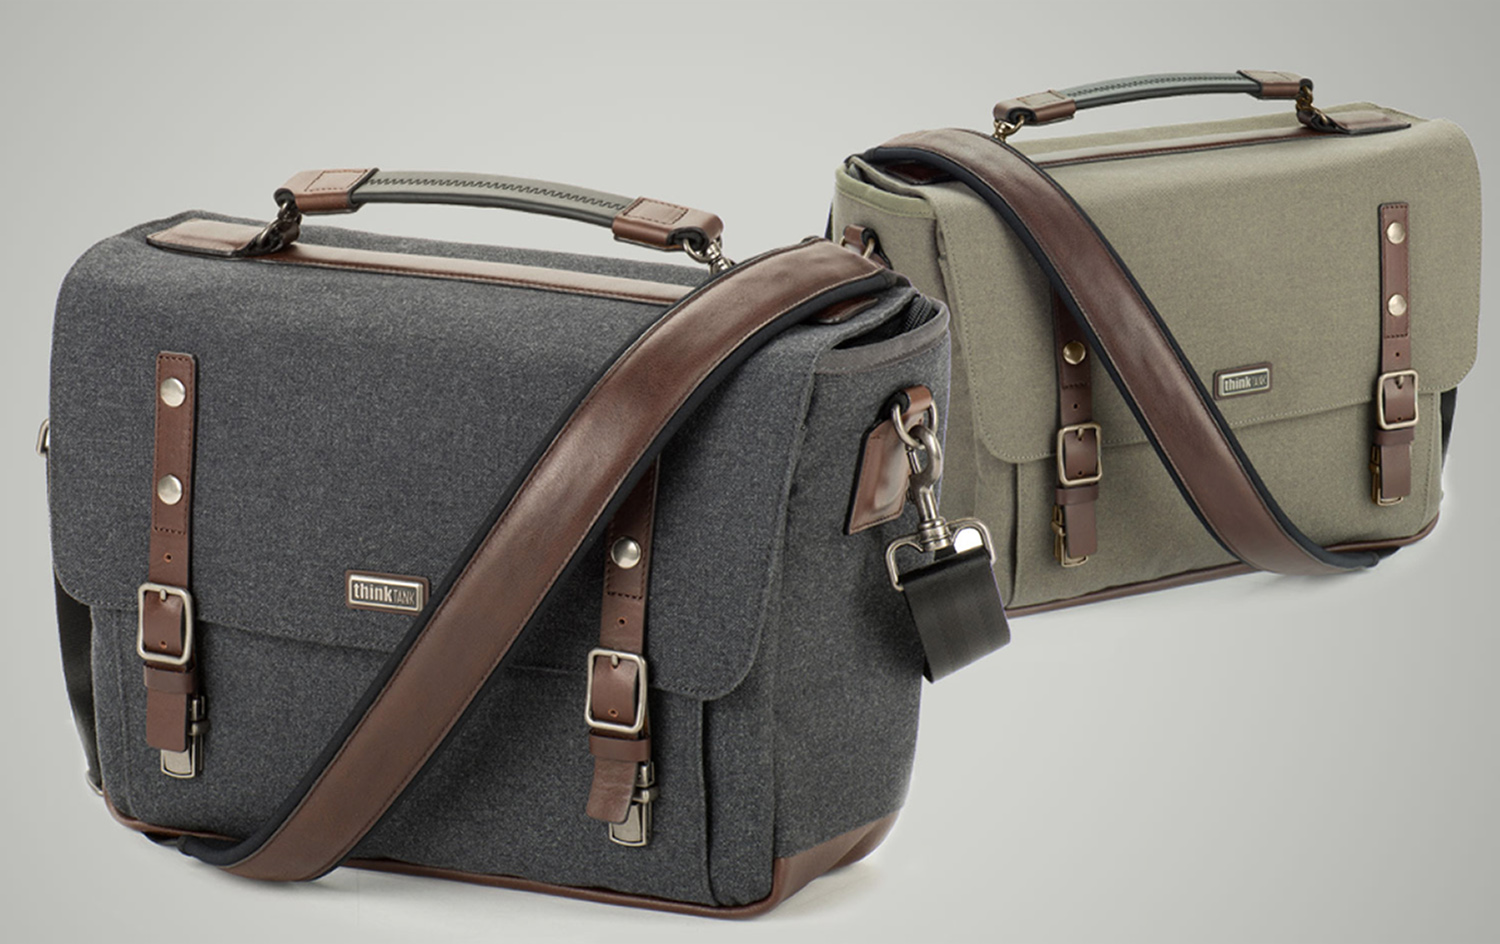 New Stylish Releases From Think Tank: The Signature 10 & 13 Camera Bags